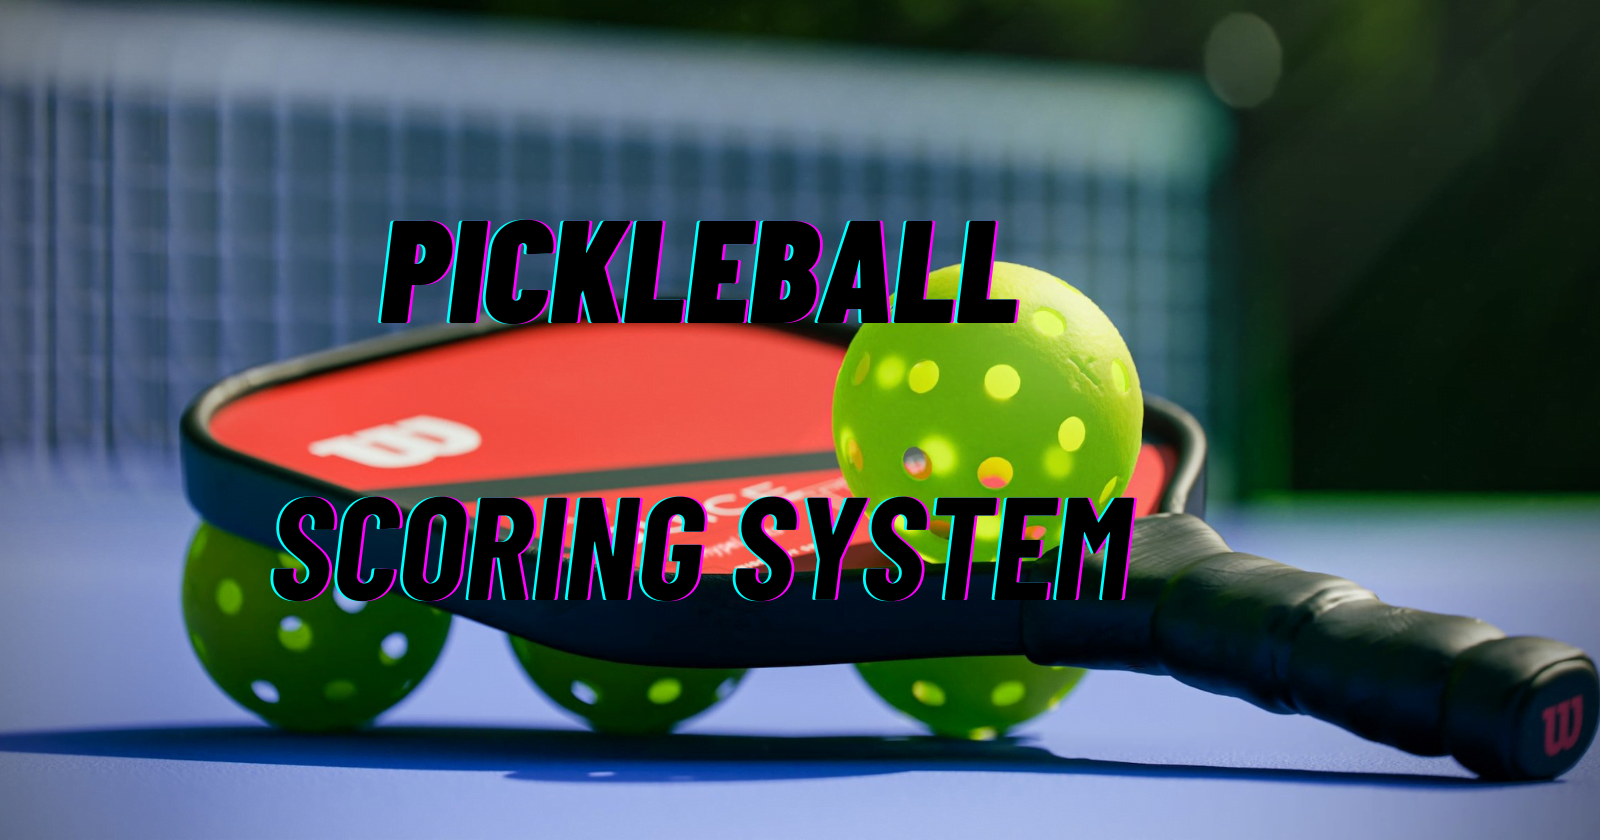 What Is The Scoring System In Pickleball